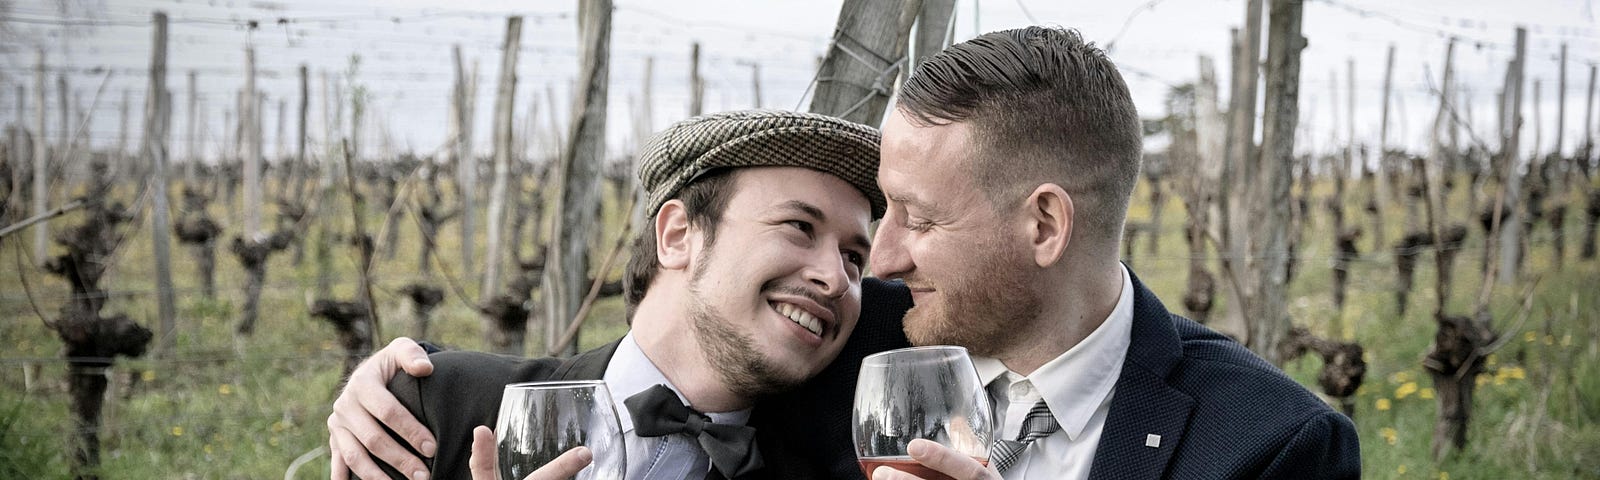 Two men holding wine glasses in a field, cuddled together and staring lovingly into each other’s eyes